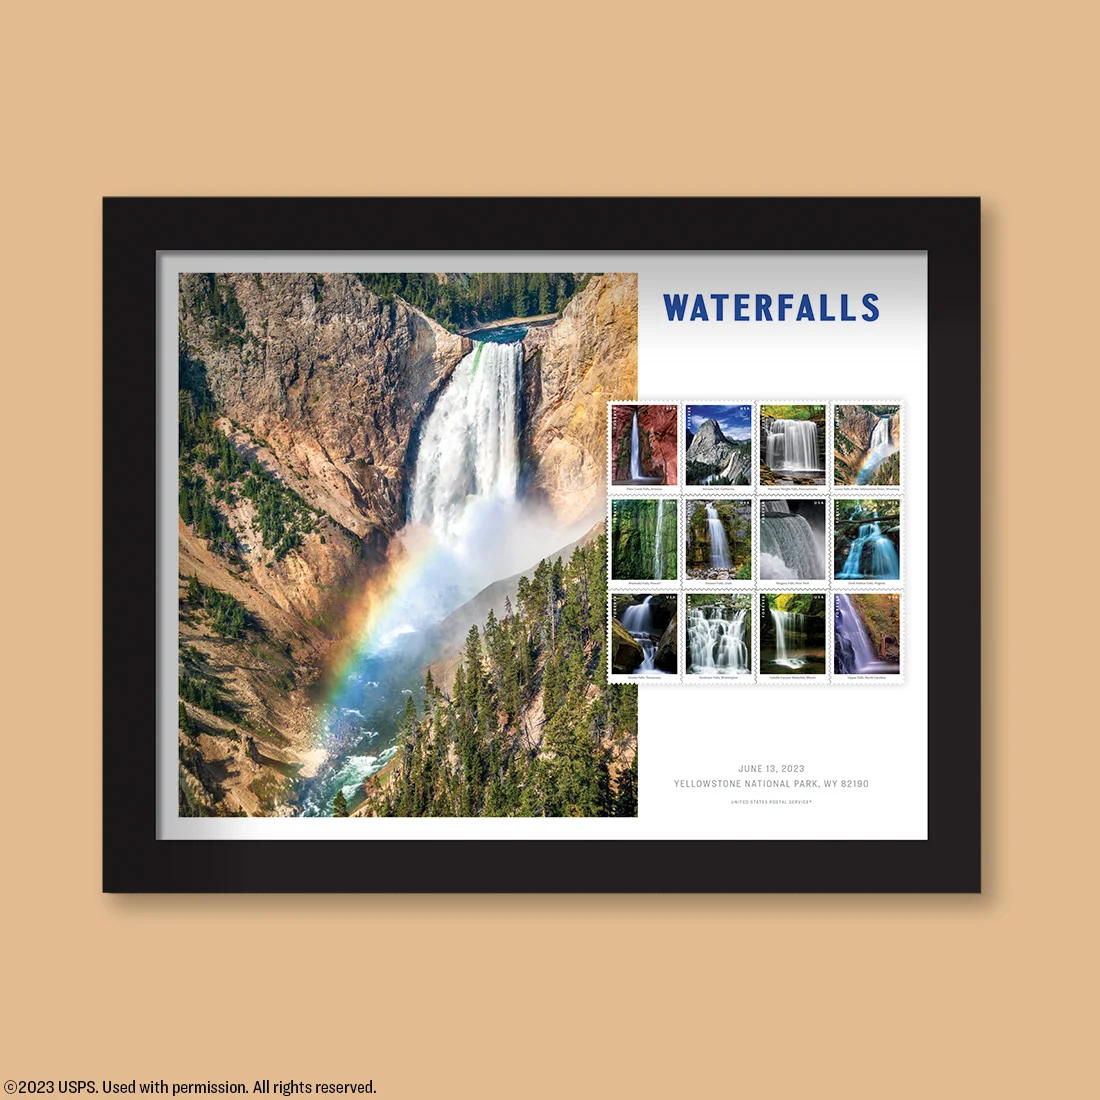 Waterfalls: U.S. Postal Service Commemorative Forever Stamps First